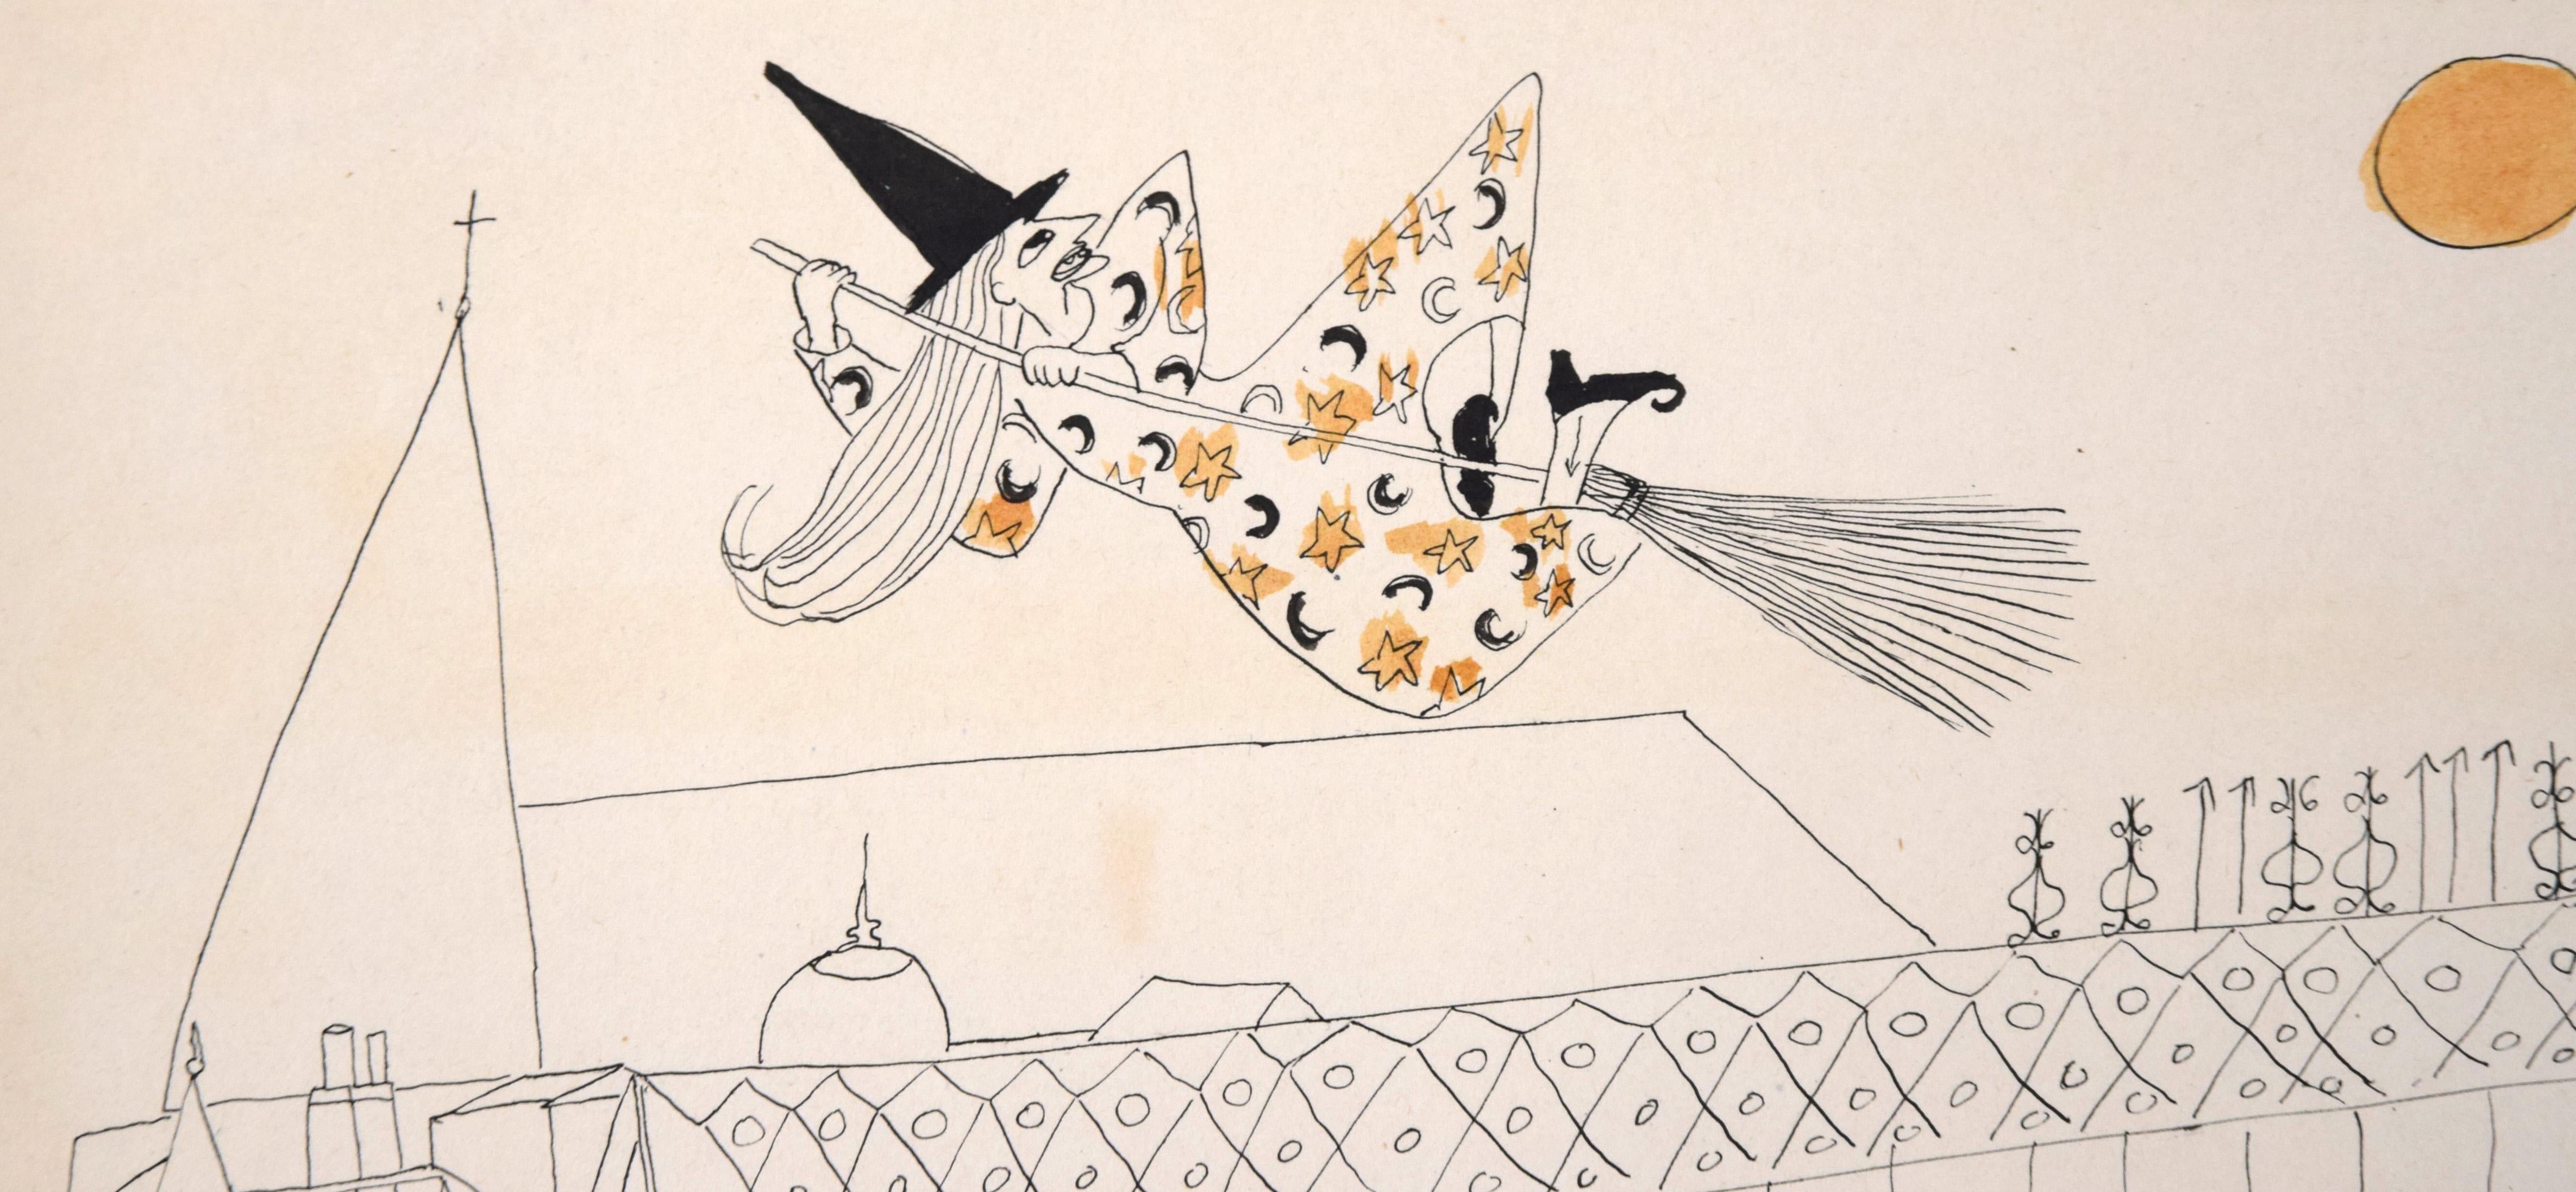 Cats Watching a Witch on a Broomstick - Vintage Halloween Illustration in Ink - American Modern Art by Irene Pattinson